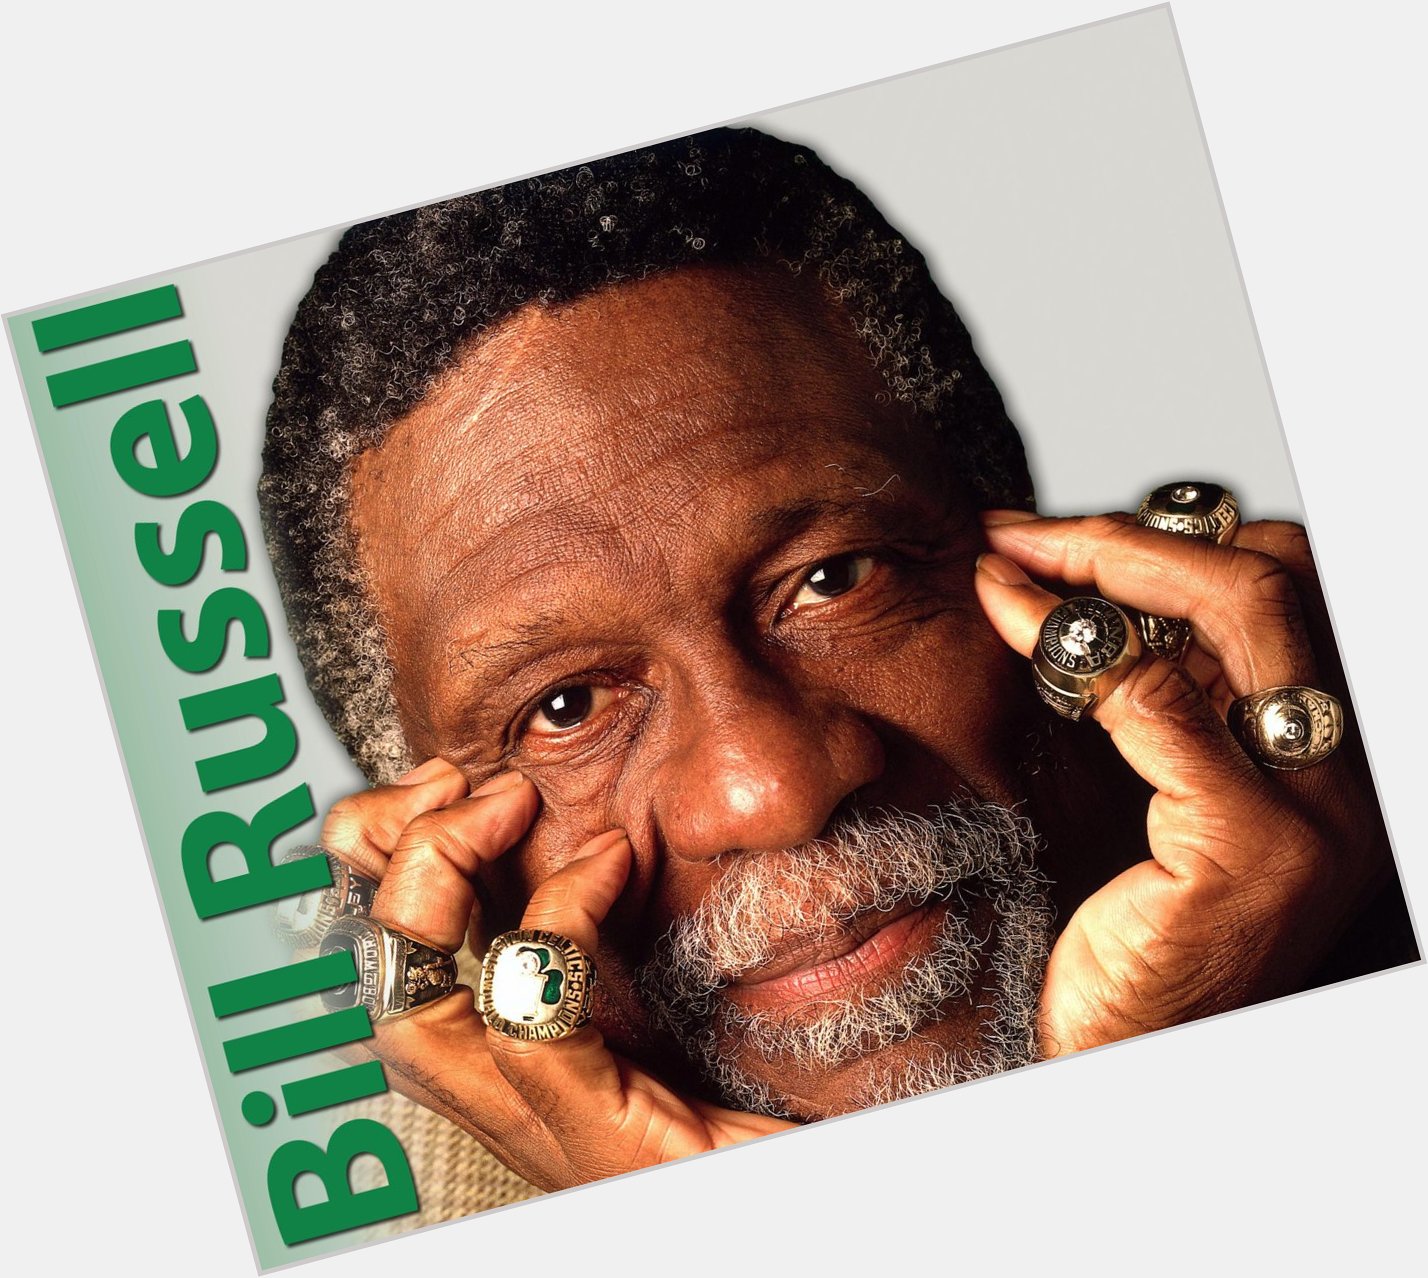            Happy Birthday Happy birthday Bill Russell! The Hall-of-Famer turns 81 today. 